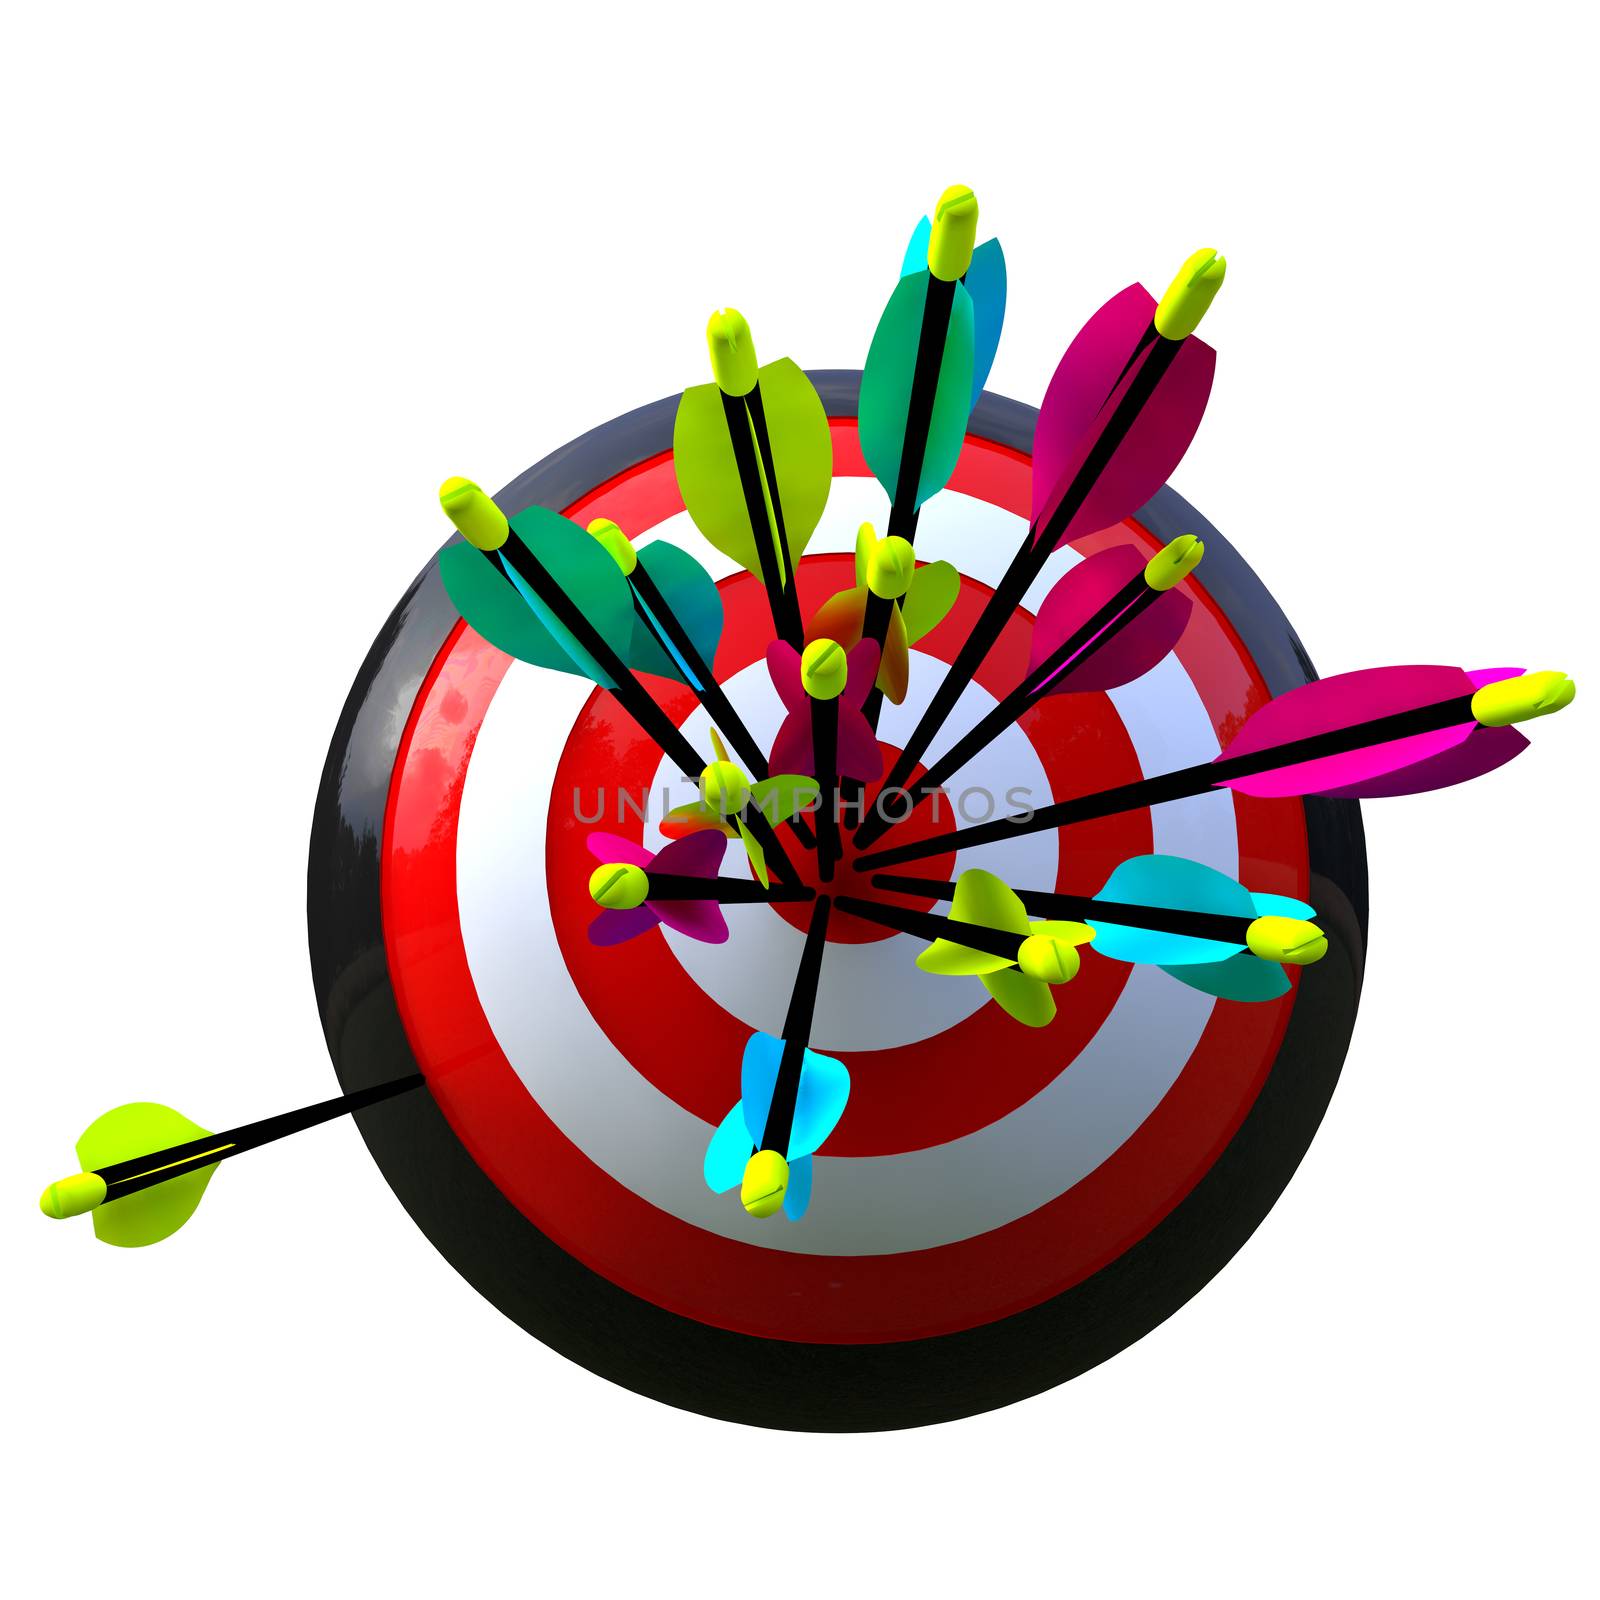 3D simulation of a ball with target and arrows in the center with an error isolated and with clipping path